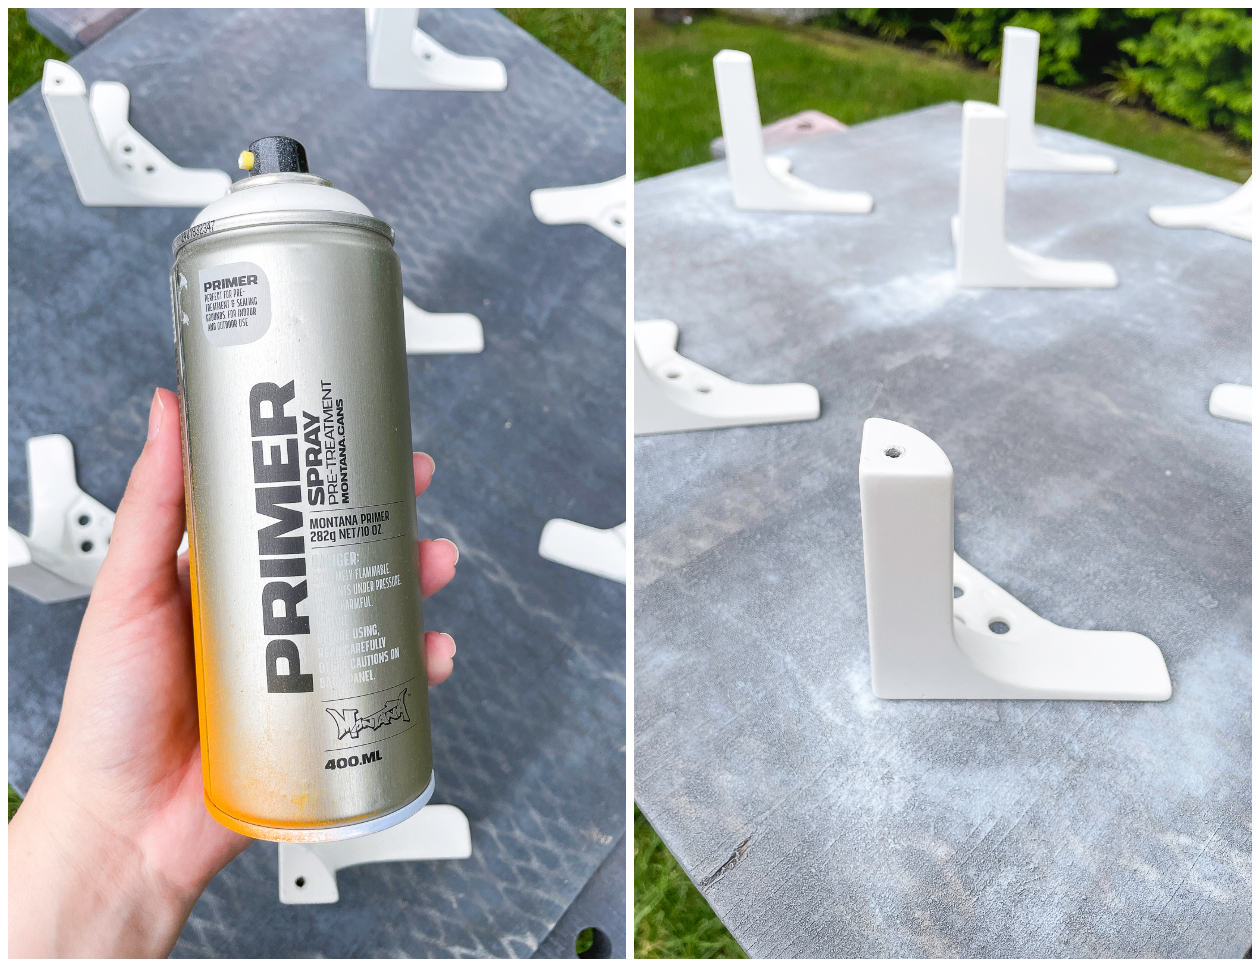 Ikea Desk Hack: Part III is all about how to paint metal Ikea legs and how to finish a wooden desk top.